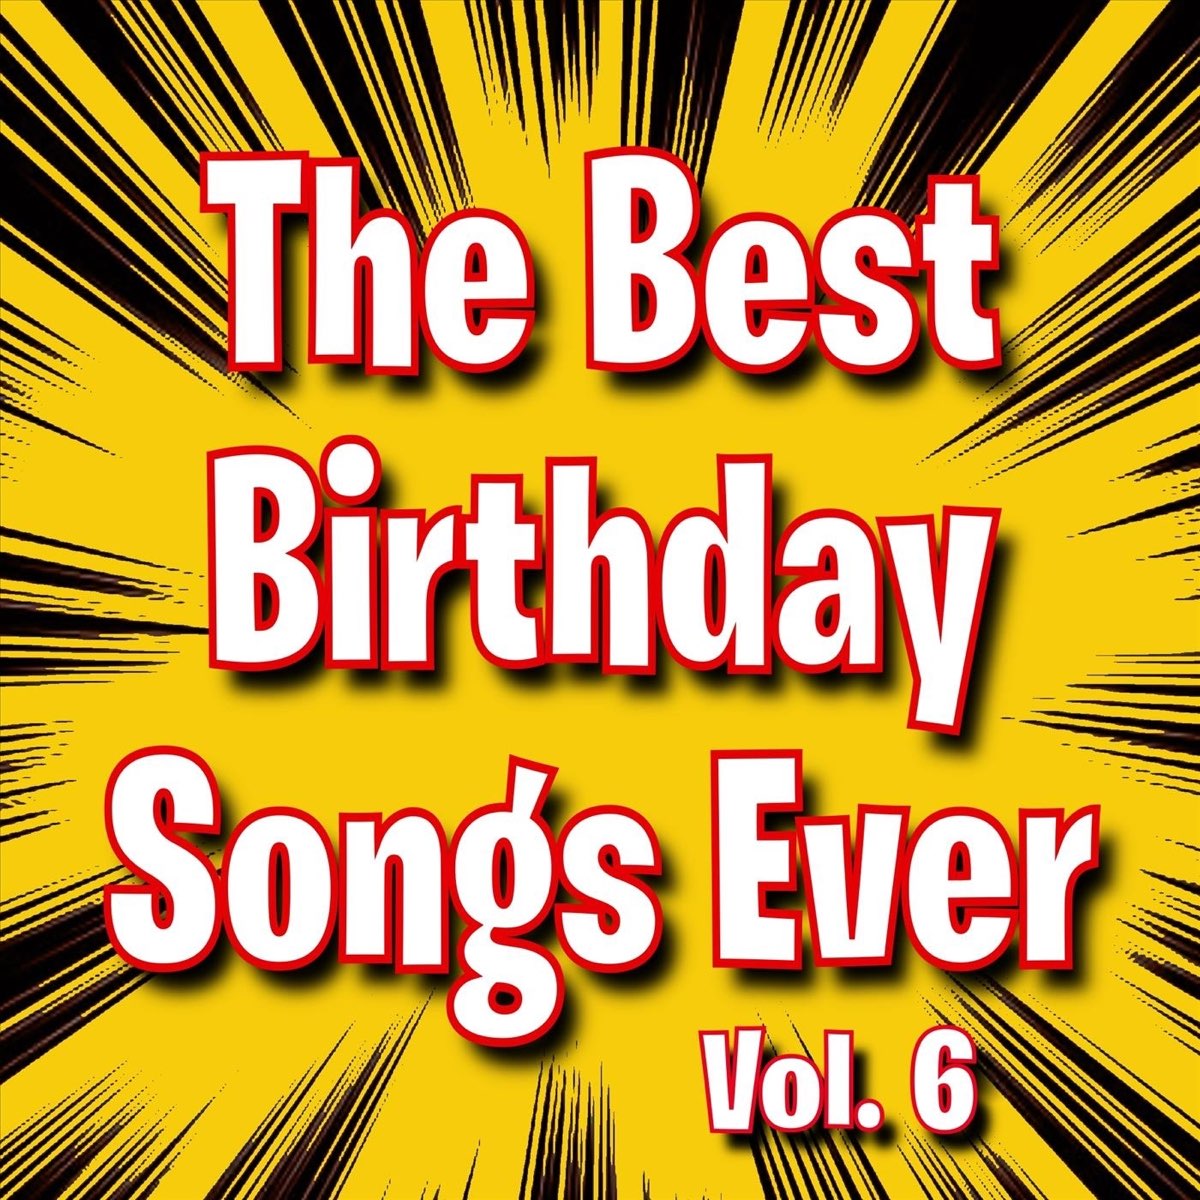 ‎The Best Birthday Songs Ever, Vol. 6 by Happy Birthday on Apple Music